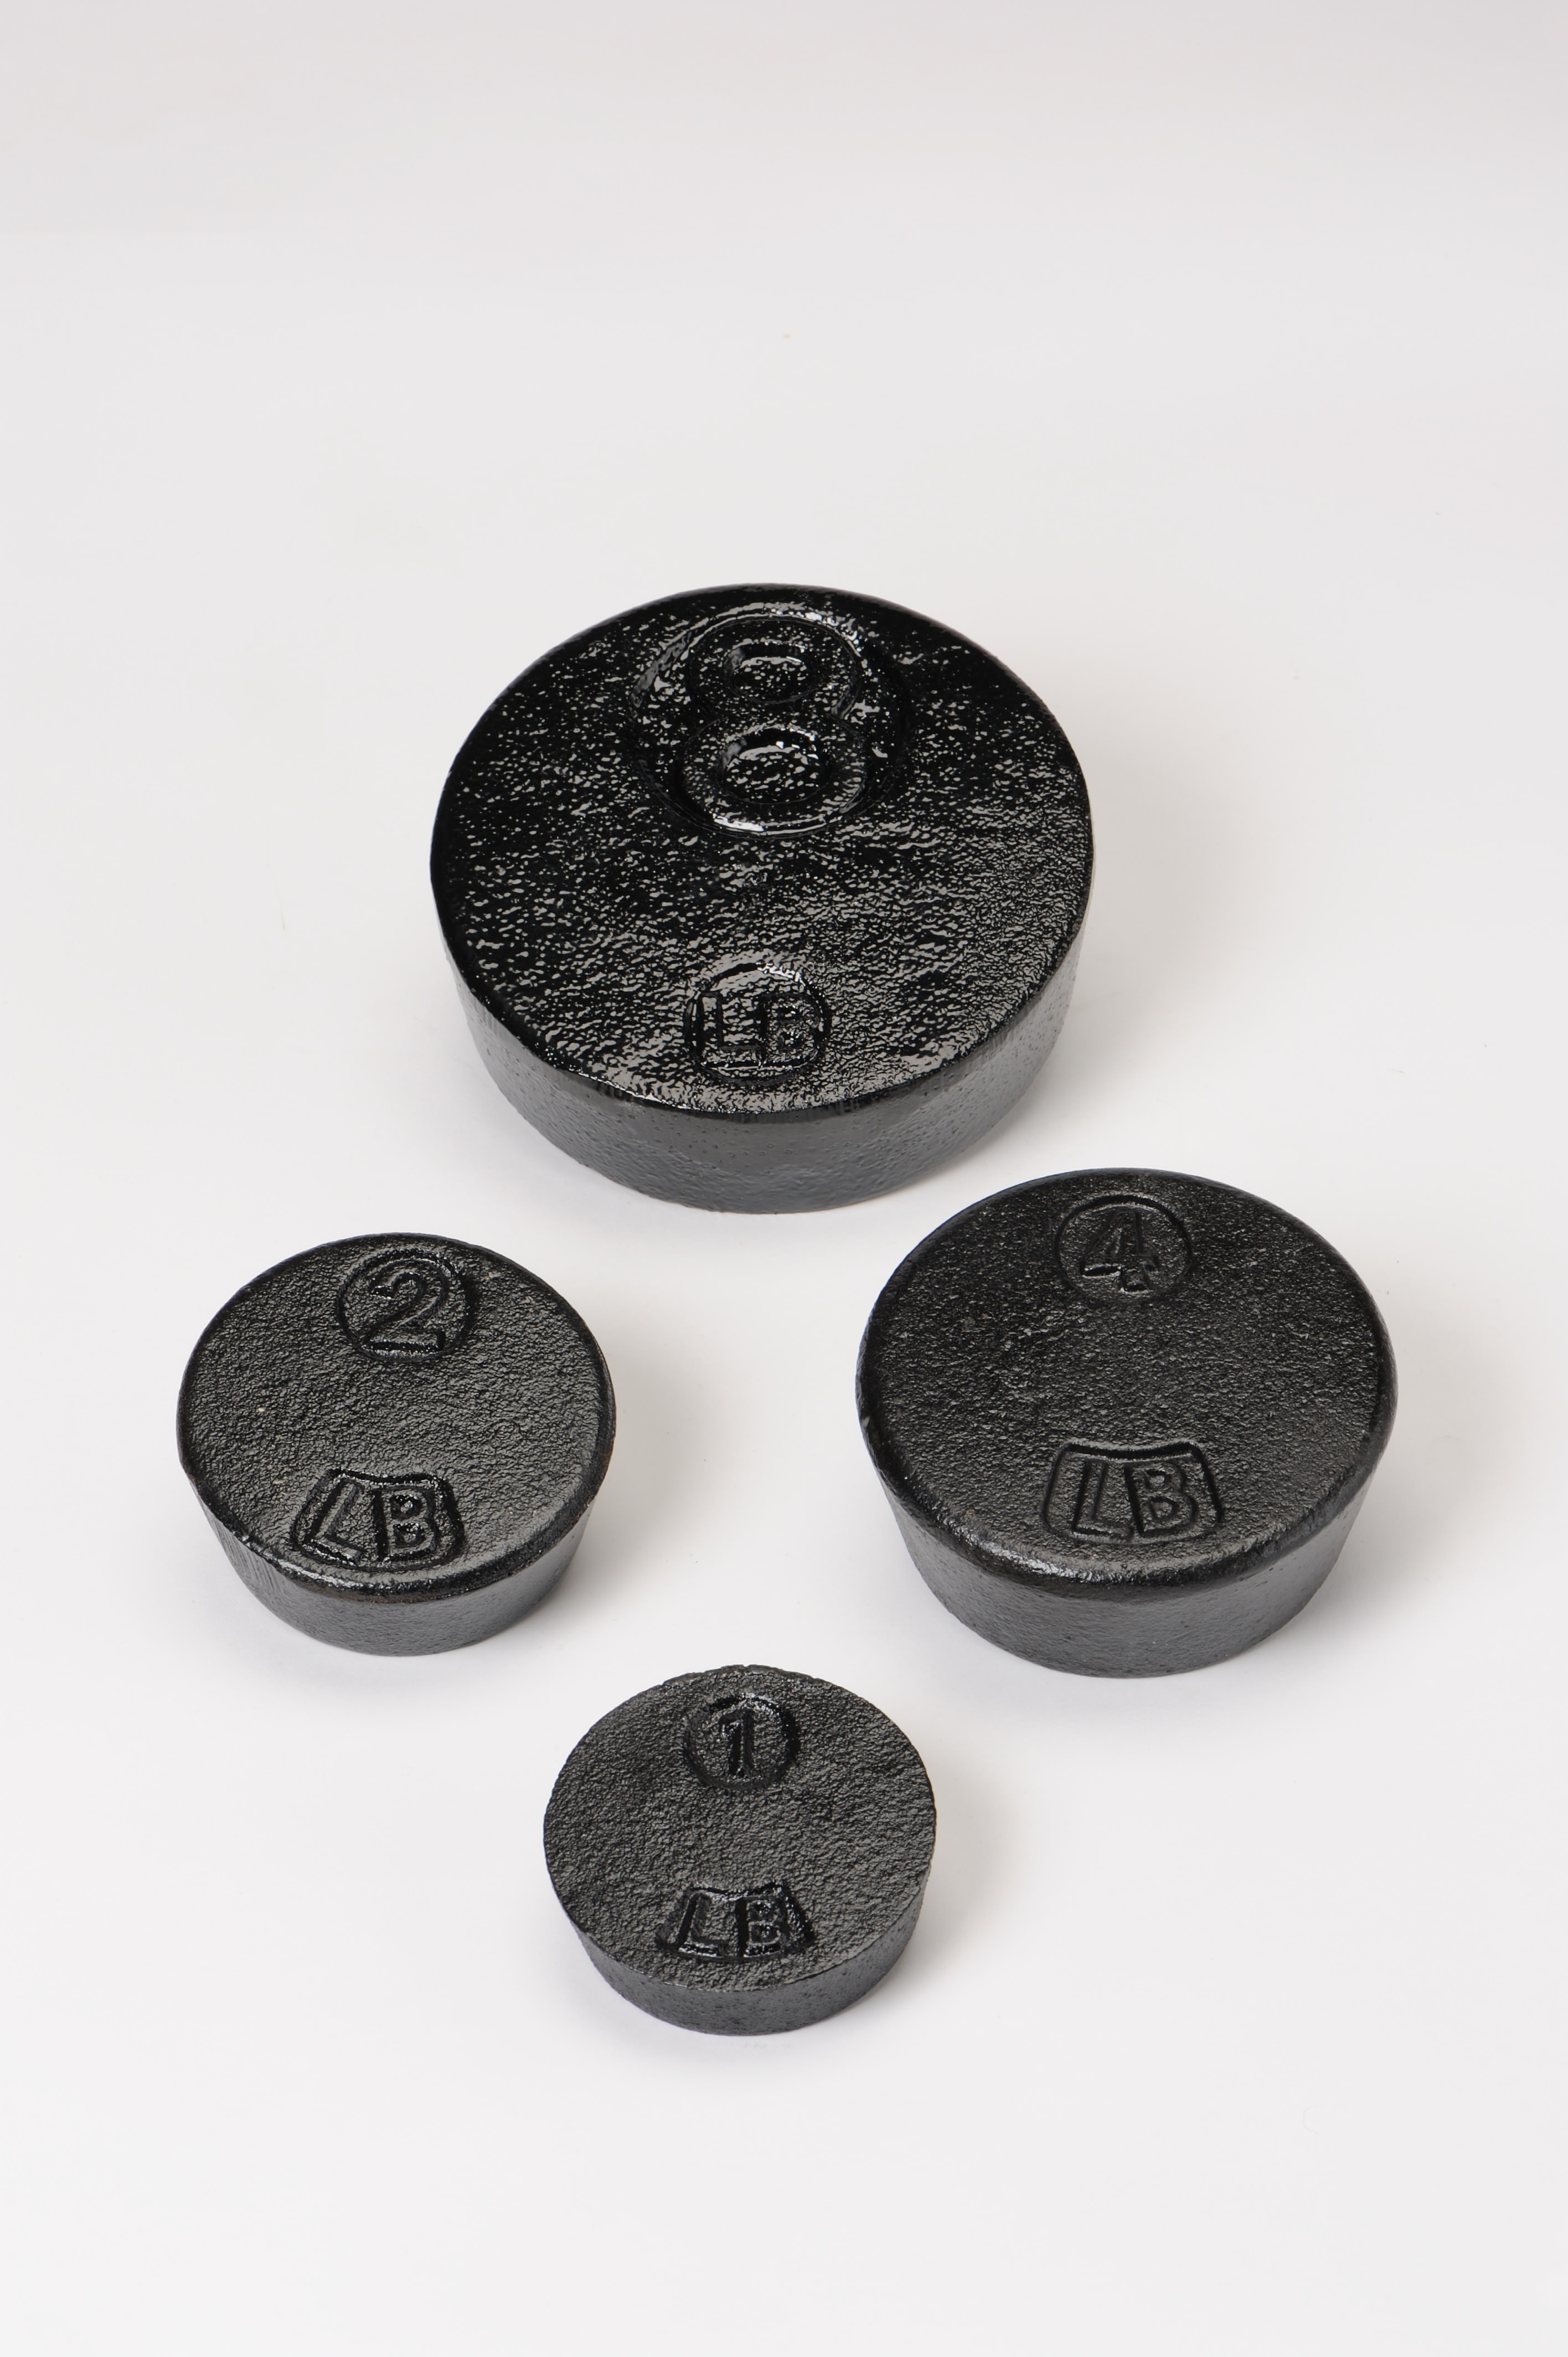 Weights / Counter Weights